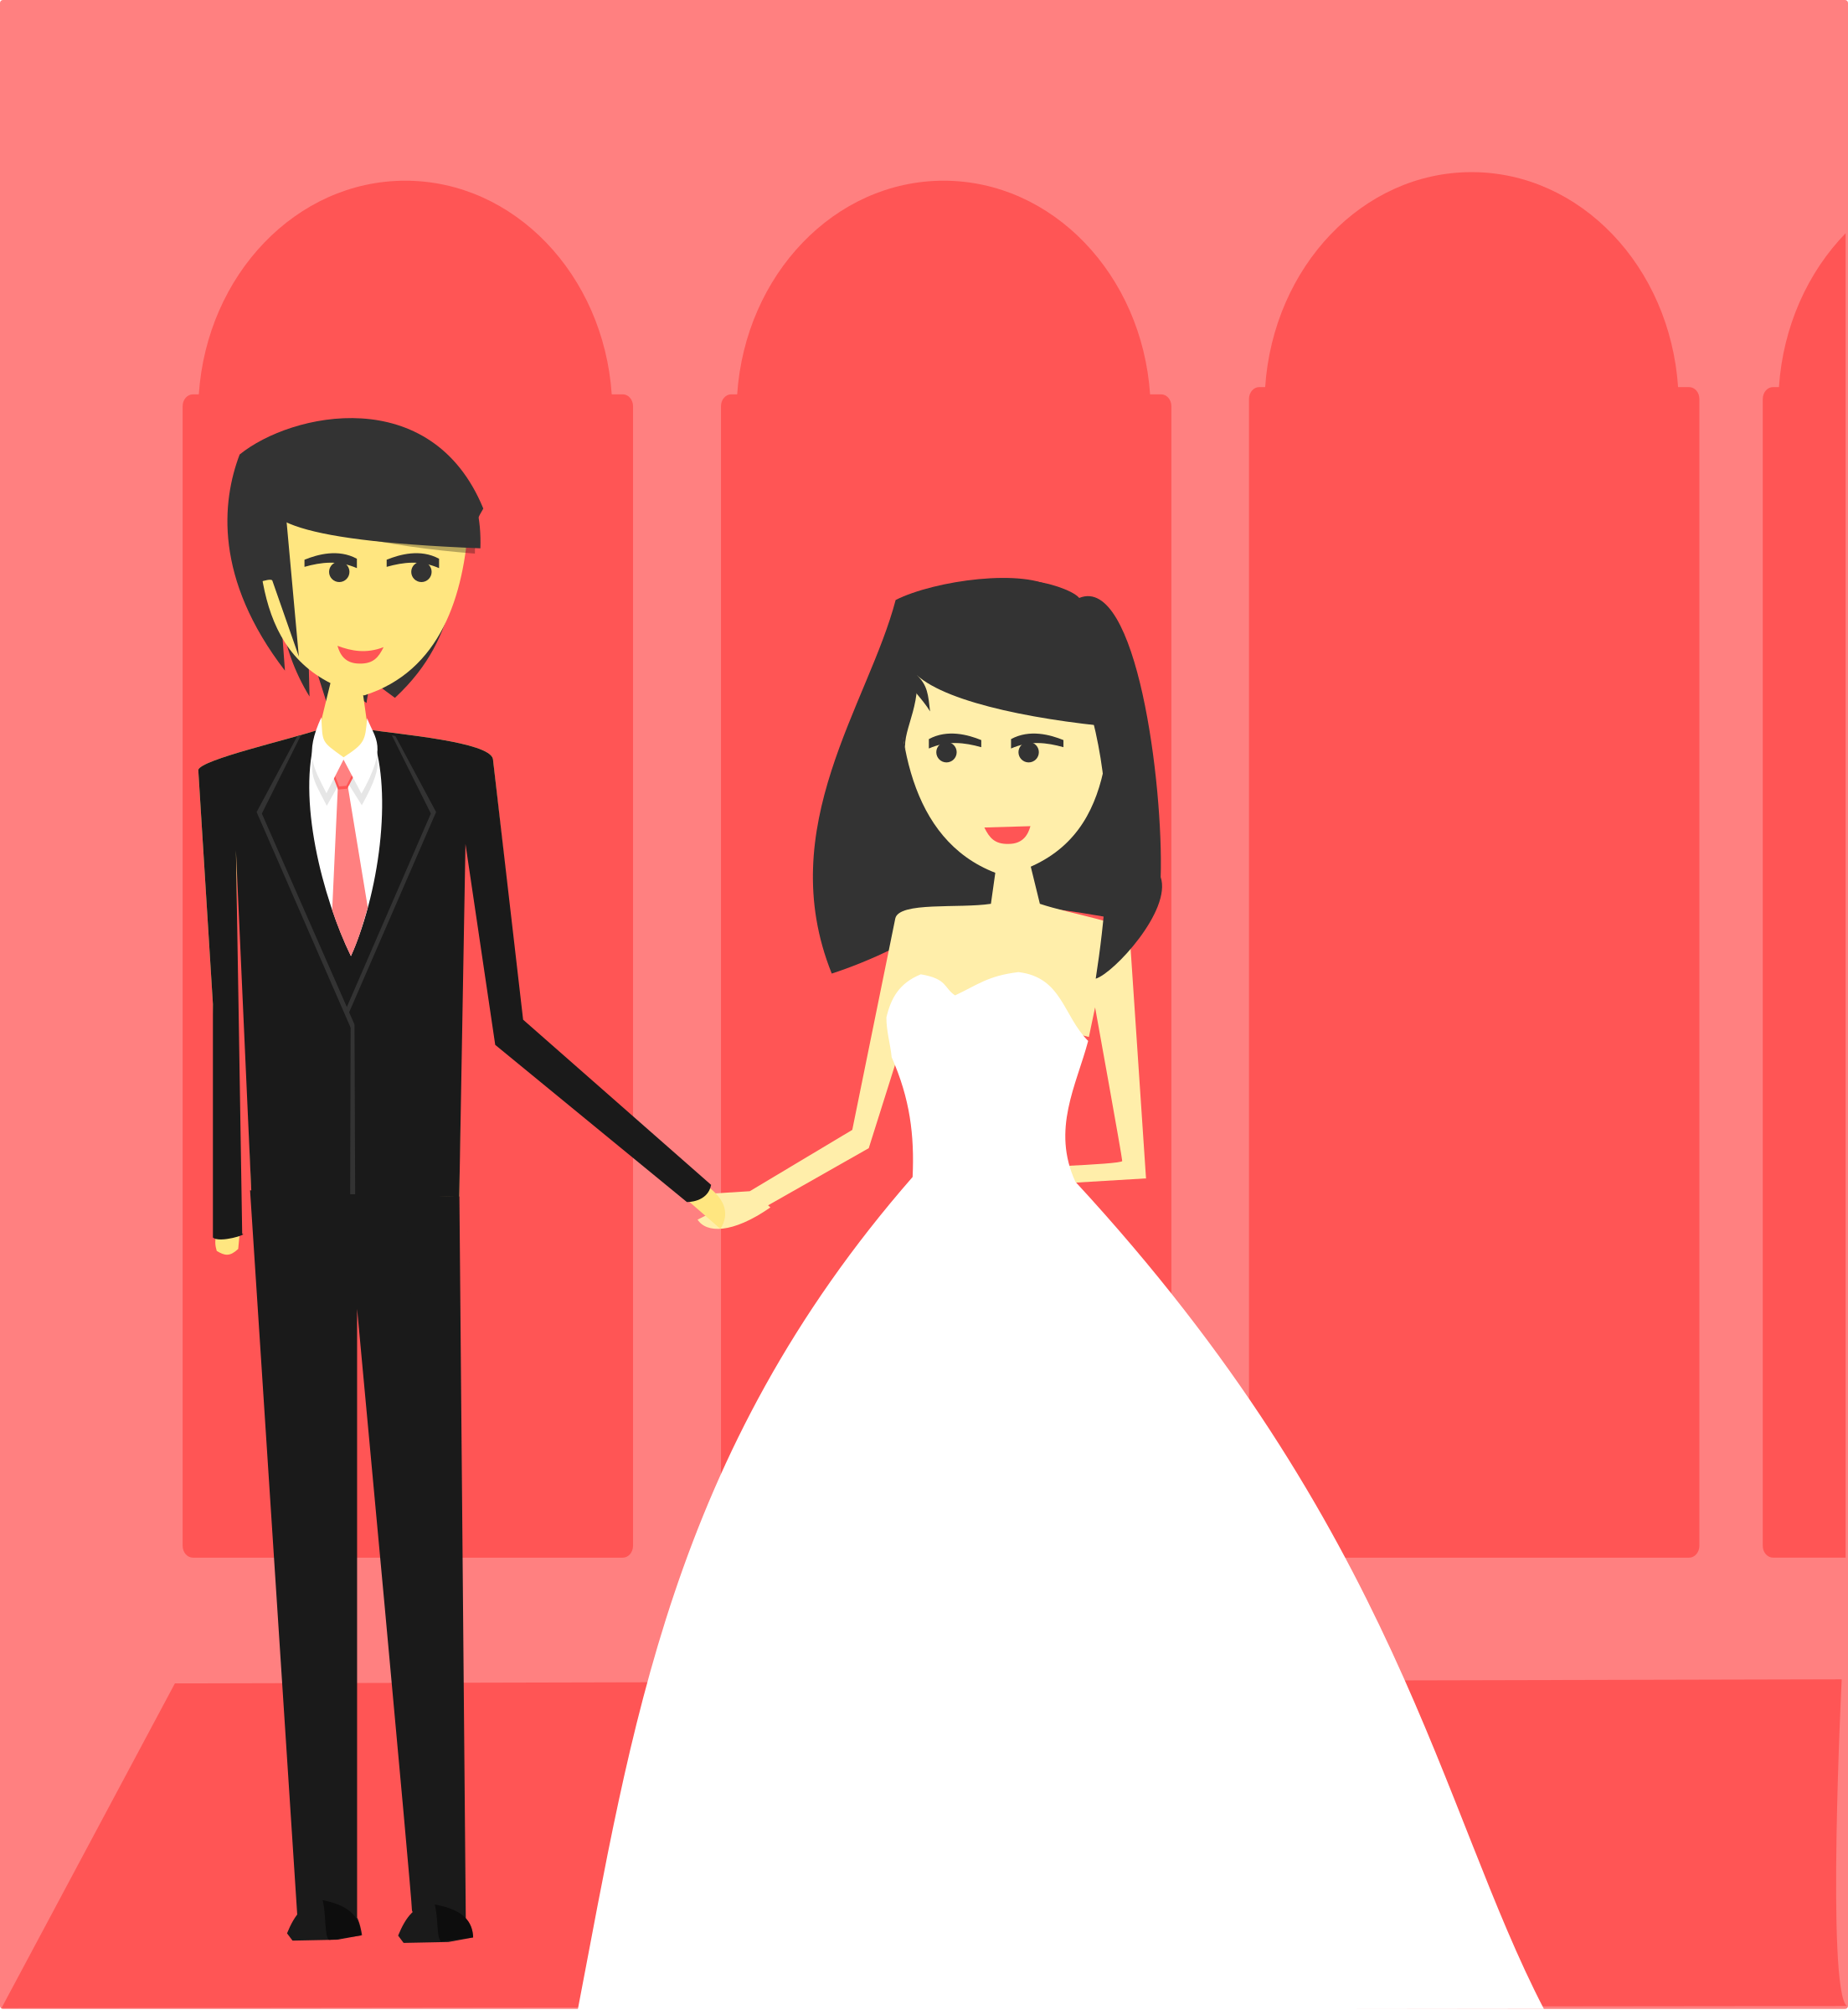 Download Bride and Groom Wedding Vector Clipart image - Free stock ...